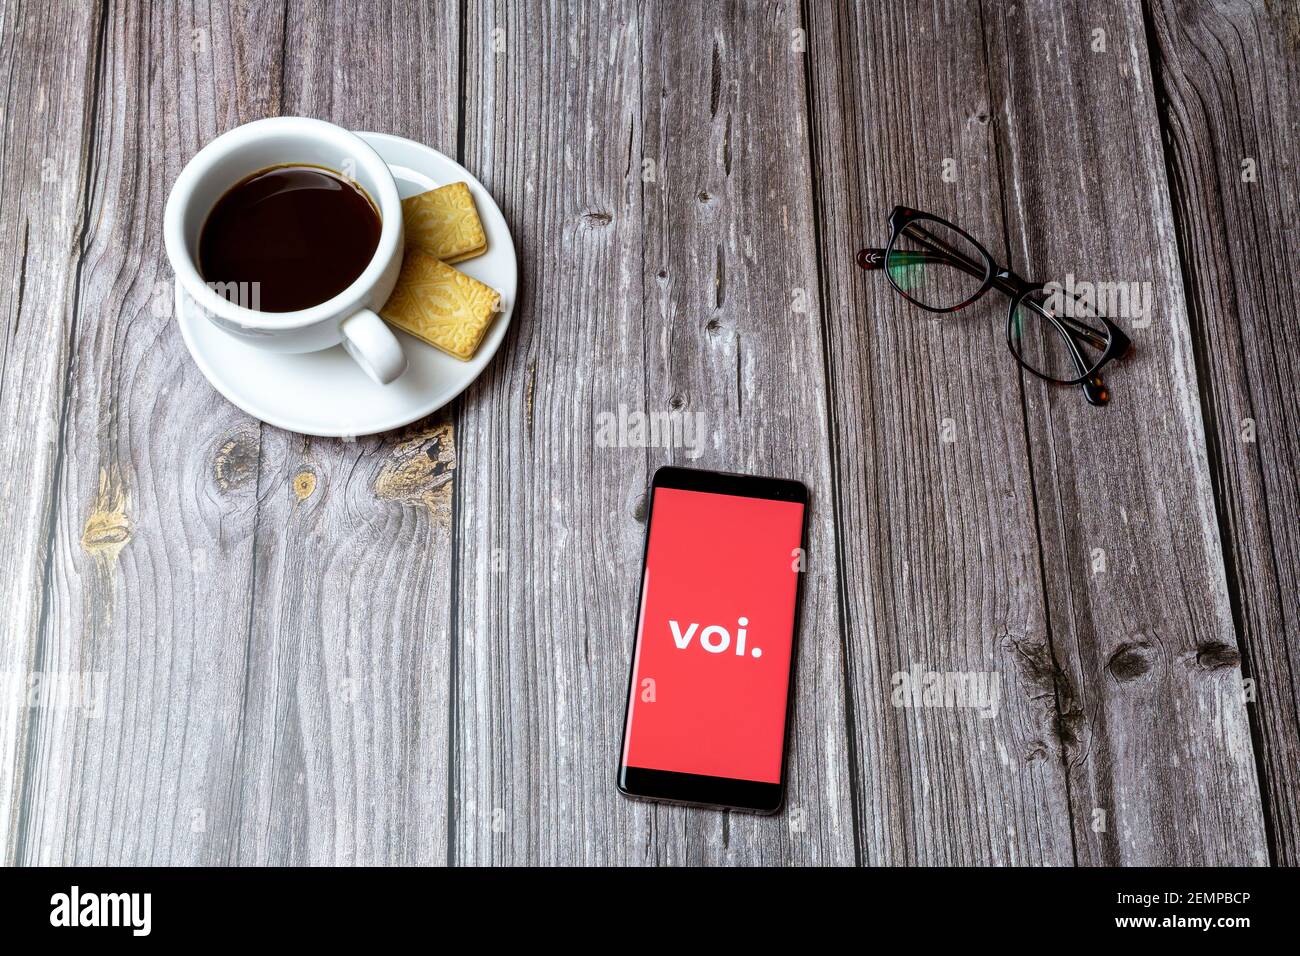 A mobile phone or cell phone on a wooden table with the VOI scooters app open next to a coffee and glasses Stock Photo